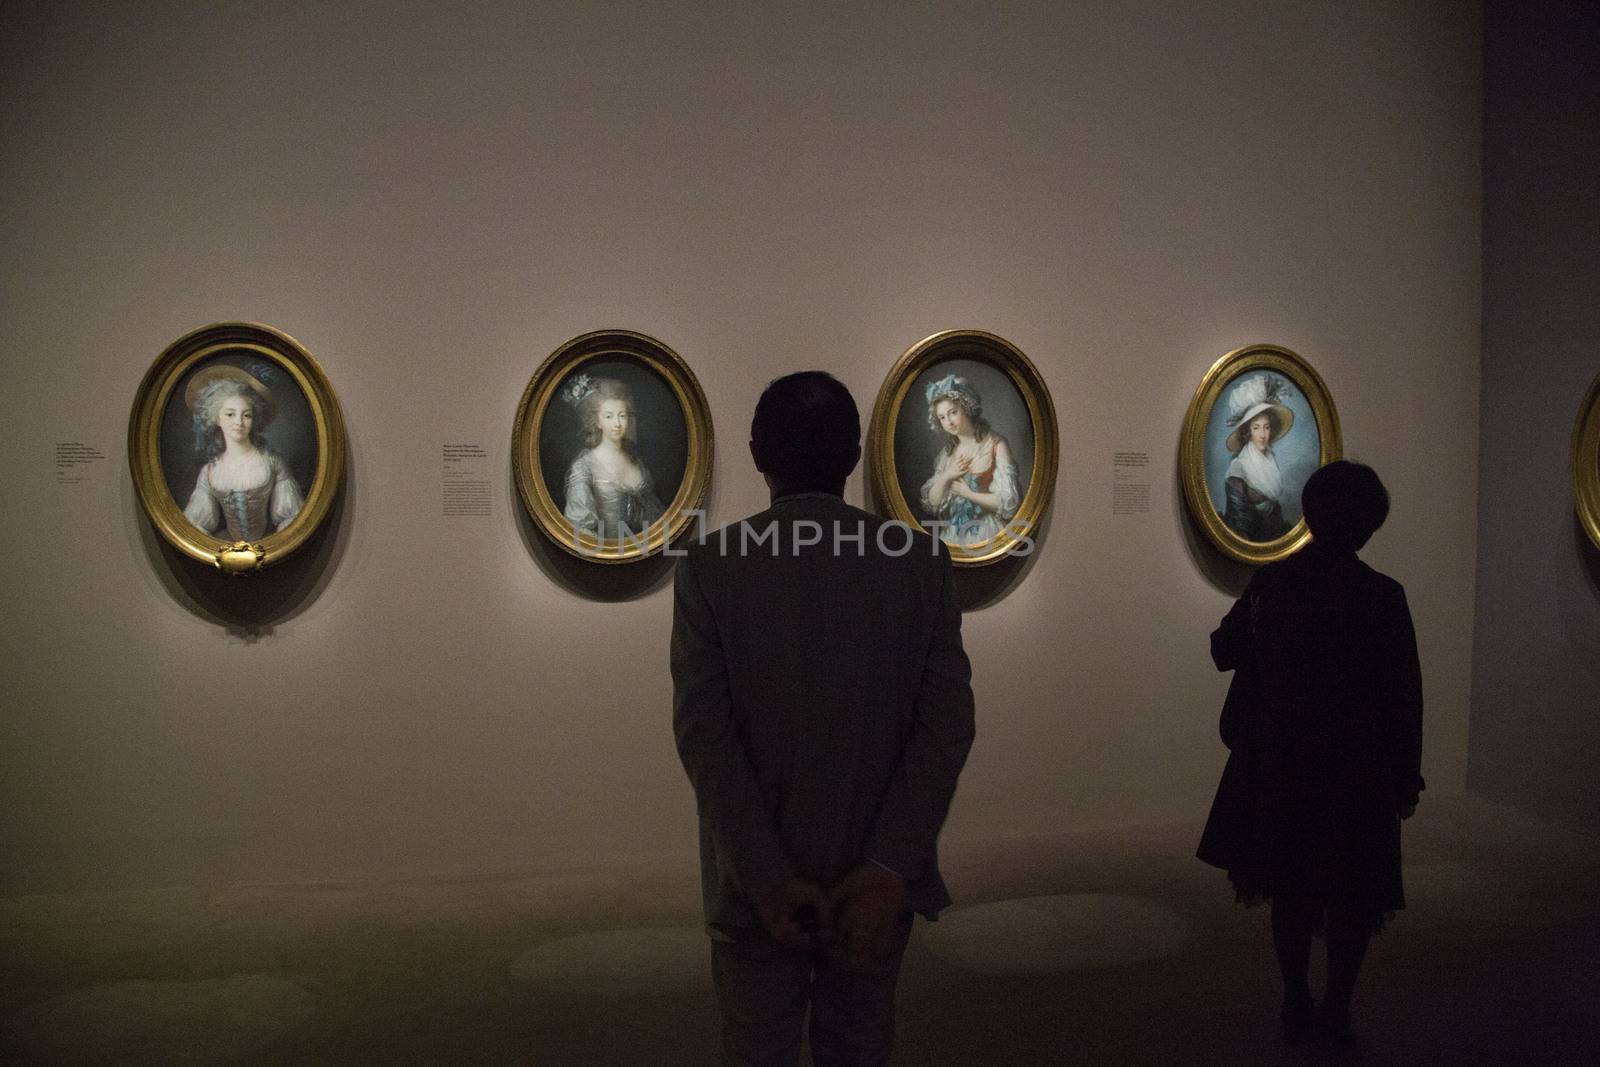 FRANCE, Paris: Some visitors watch a portrait of �lisabeth Louise Vig�e Le Brun in Le Grand Palais, in Paris on September 21, 2015. �lisabeth Louise Vig�e Le Brun (1755-1842) is one of the greater portrait painter of her time. She was chosen to paint the very famous queen of France Marie-Antoinette. 